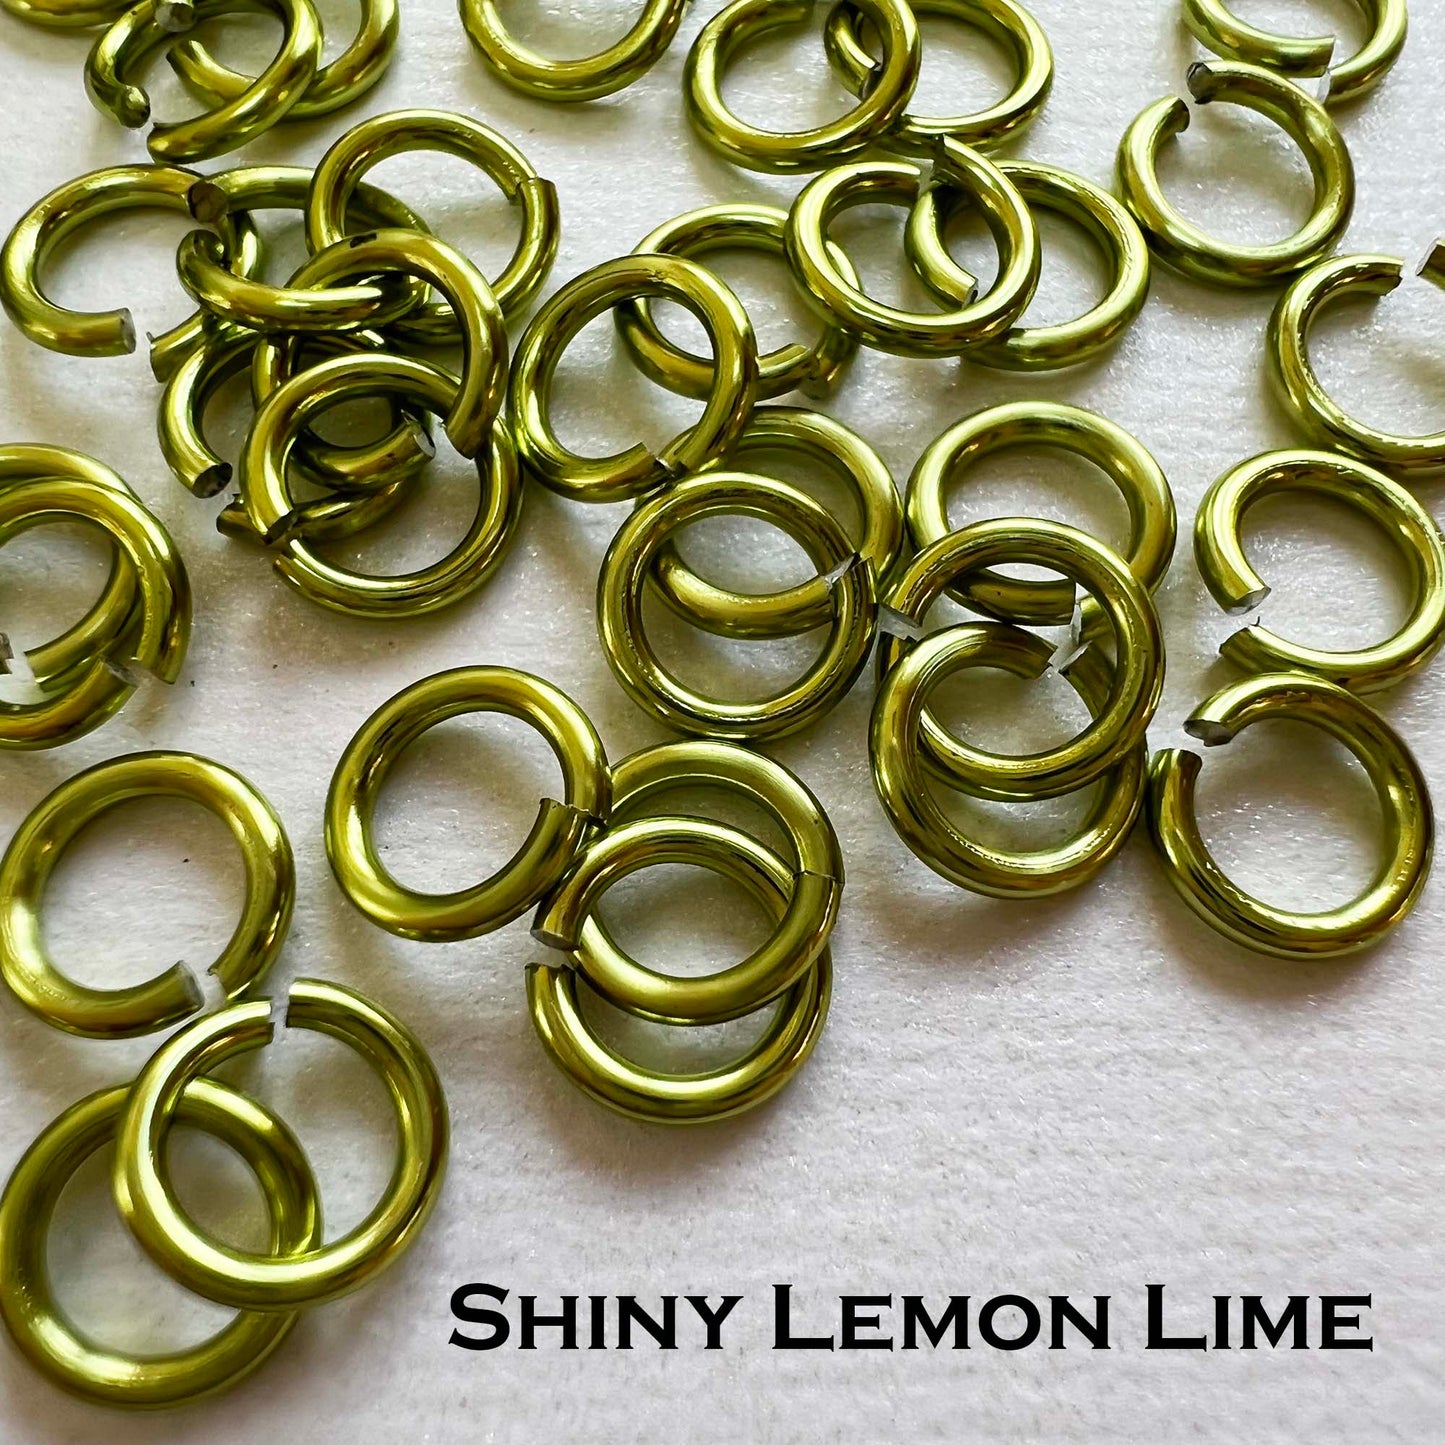 20g 1/8" Jump Rings SHINY (AWG) ID: 3.4mm - choose color & quantity